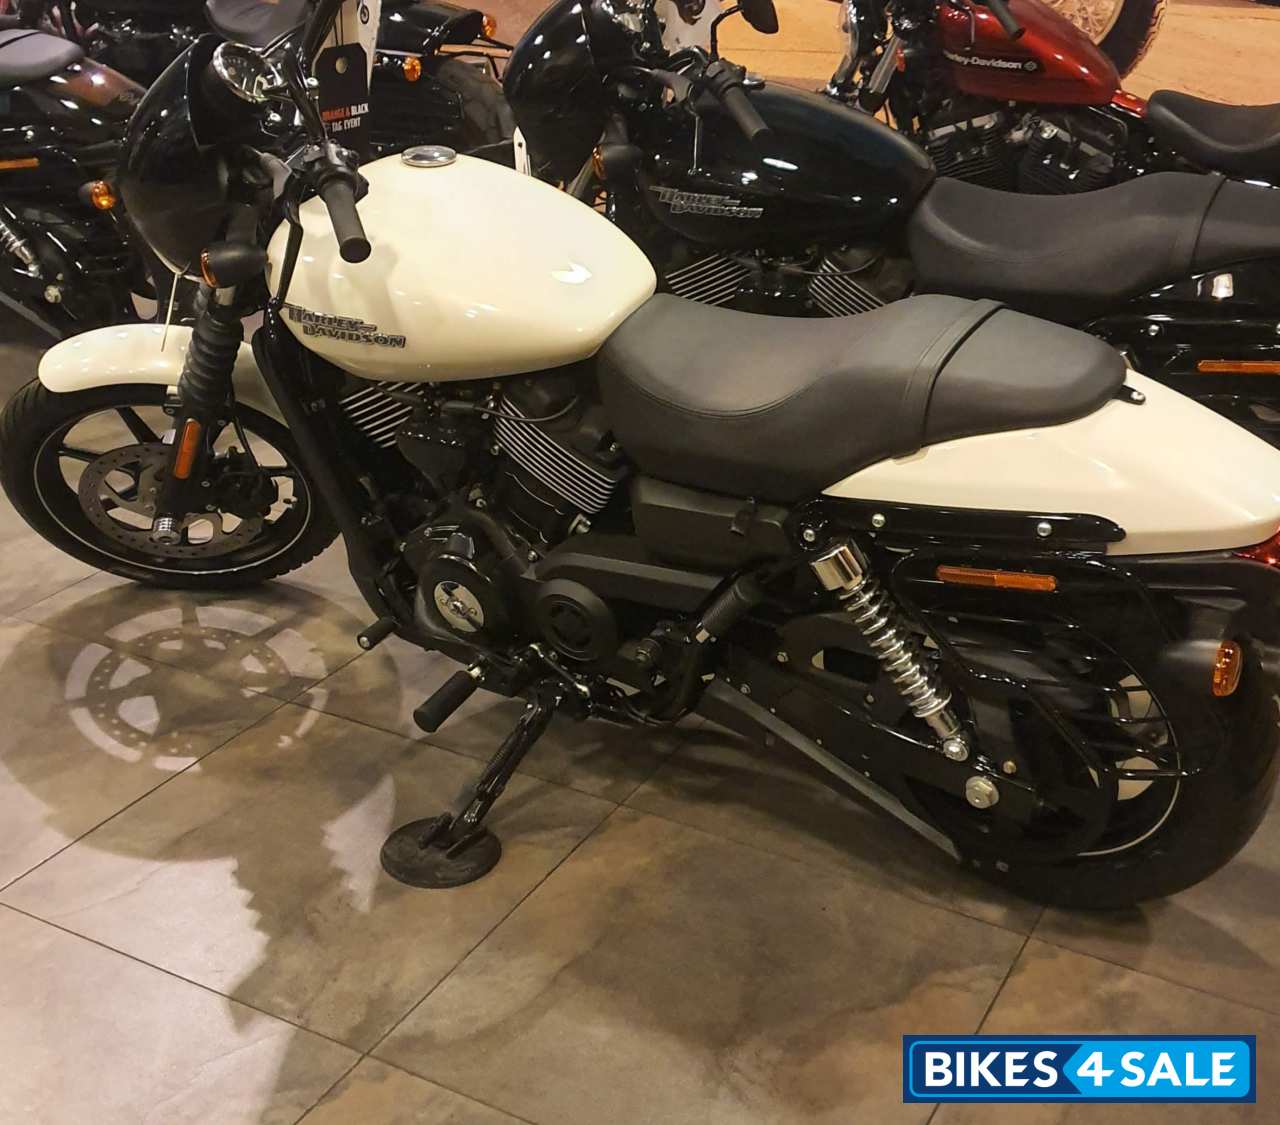 Used Harley Davidson Street 750 For Sale In Bangalore Id 291211 Bikes4sale